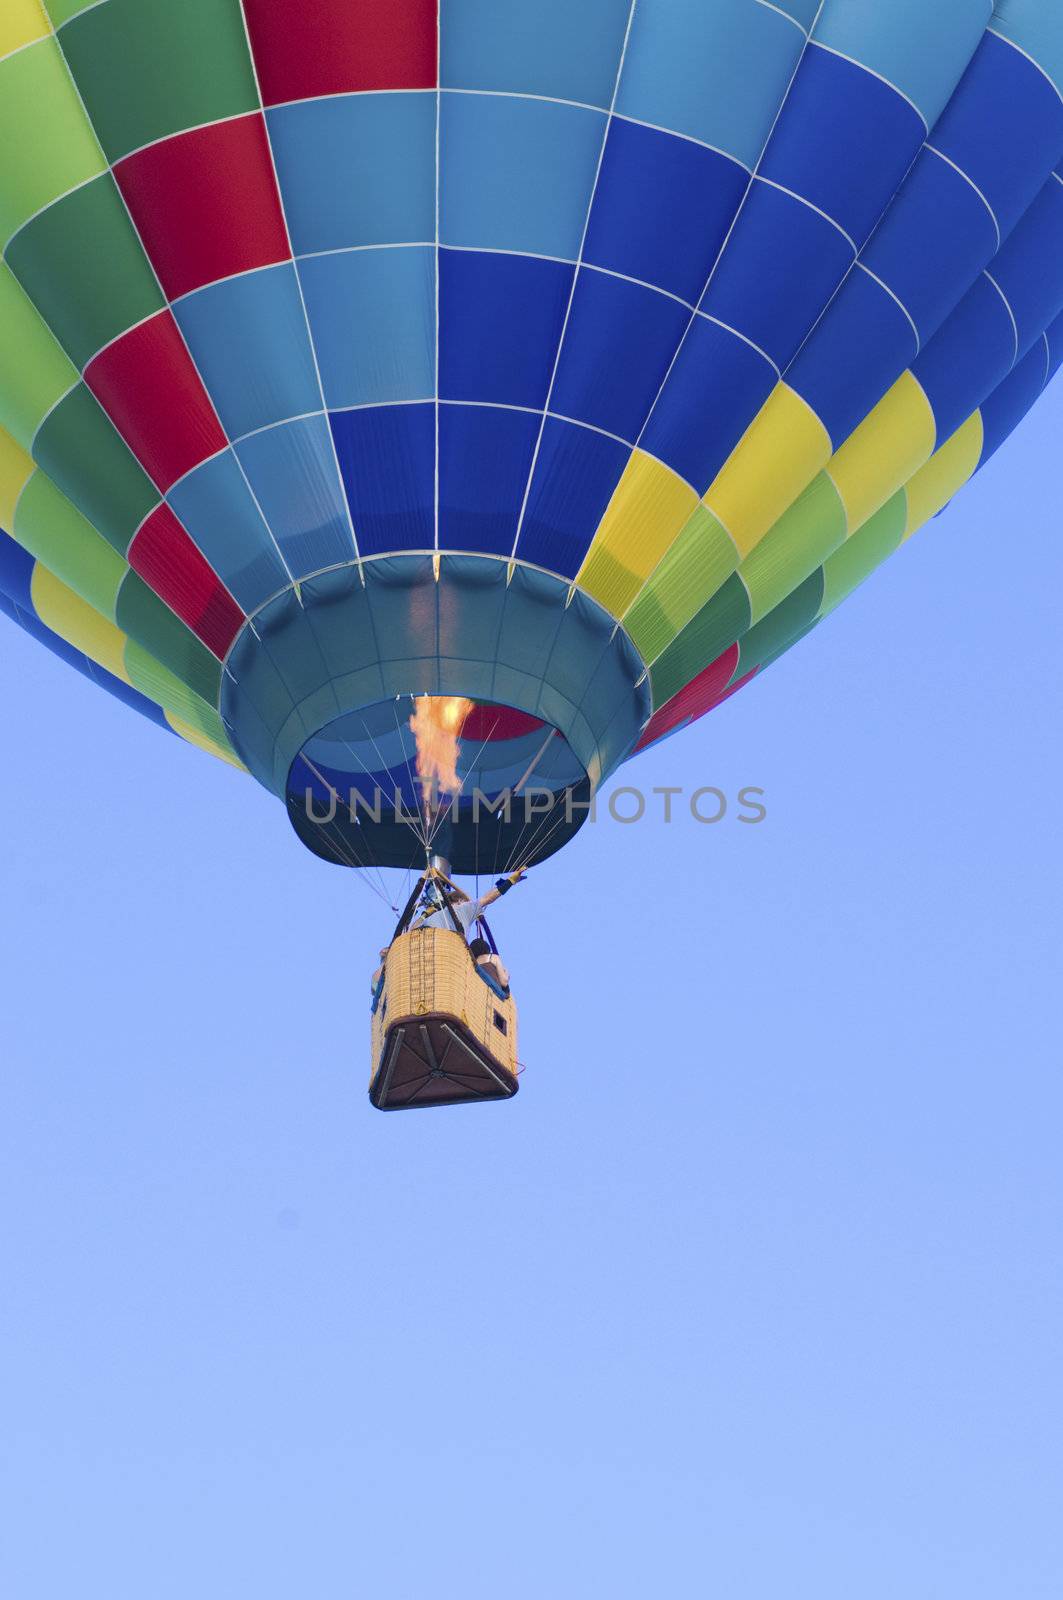 Hot-air balloon floating with view of gondola and burner ignition from below